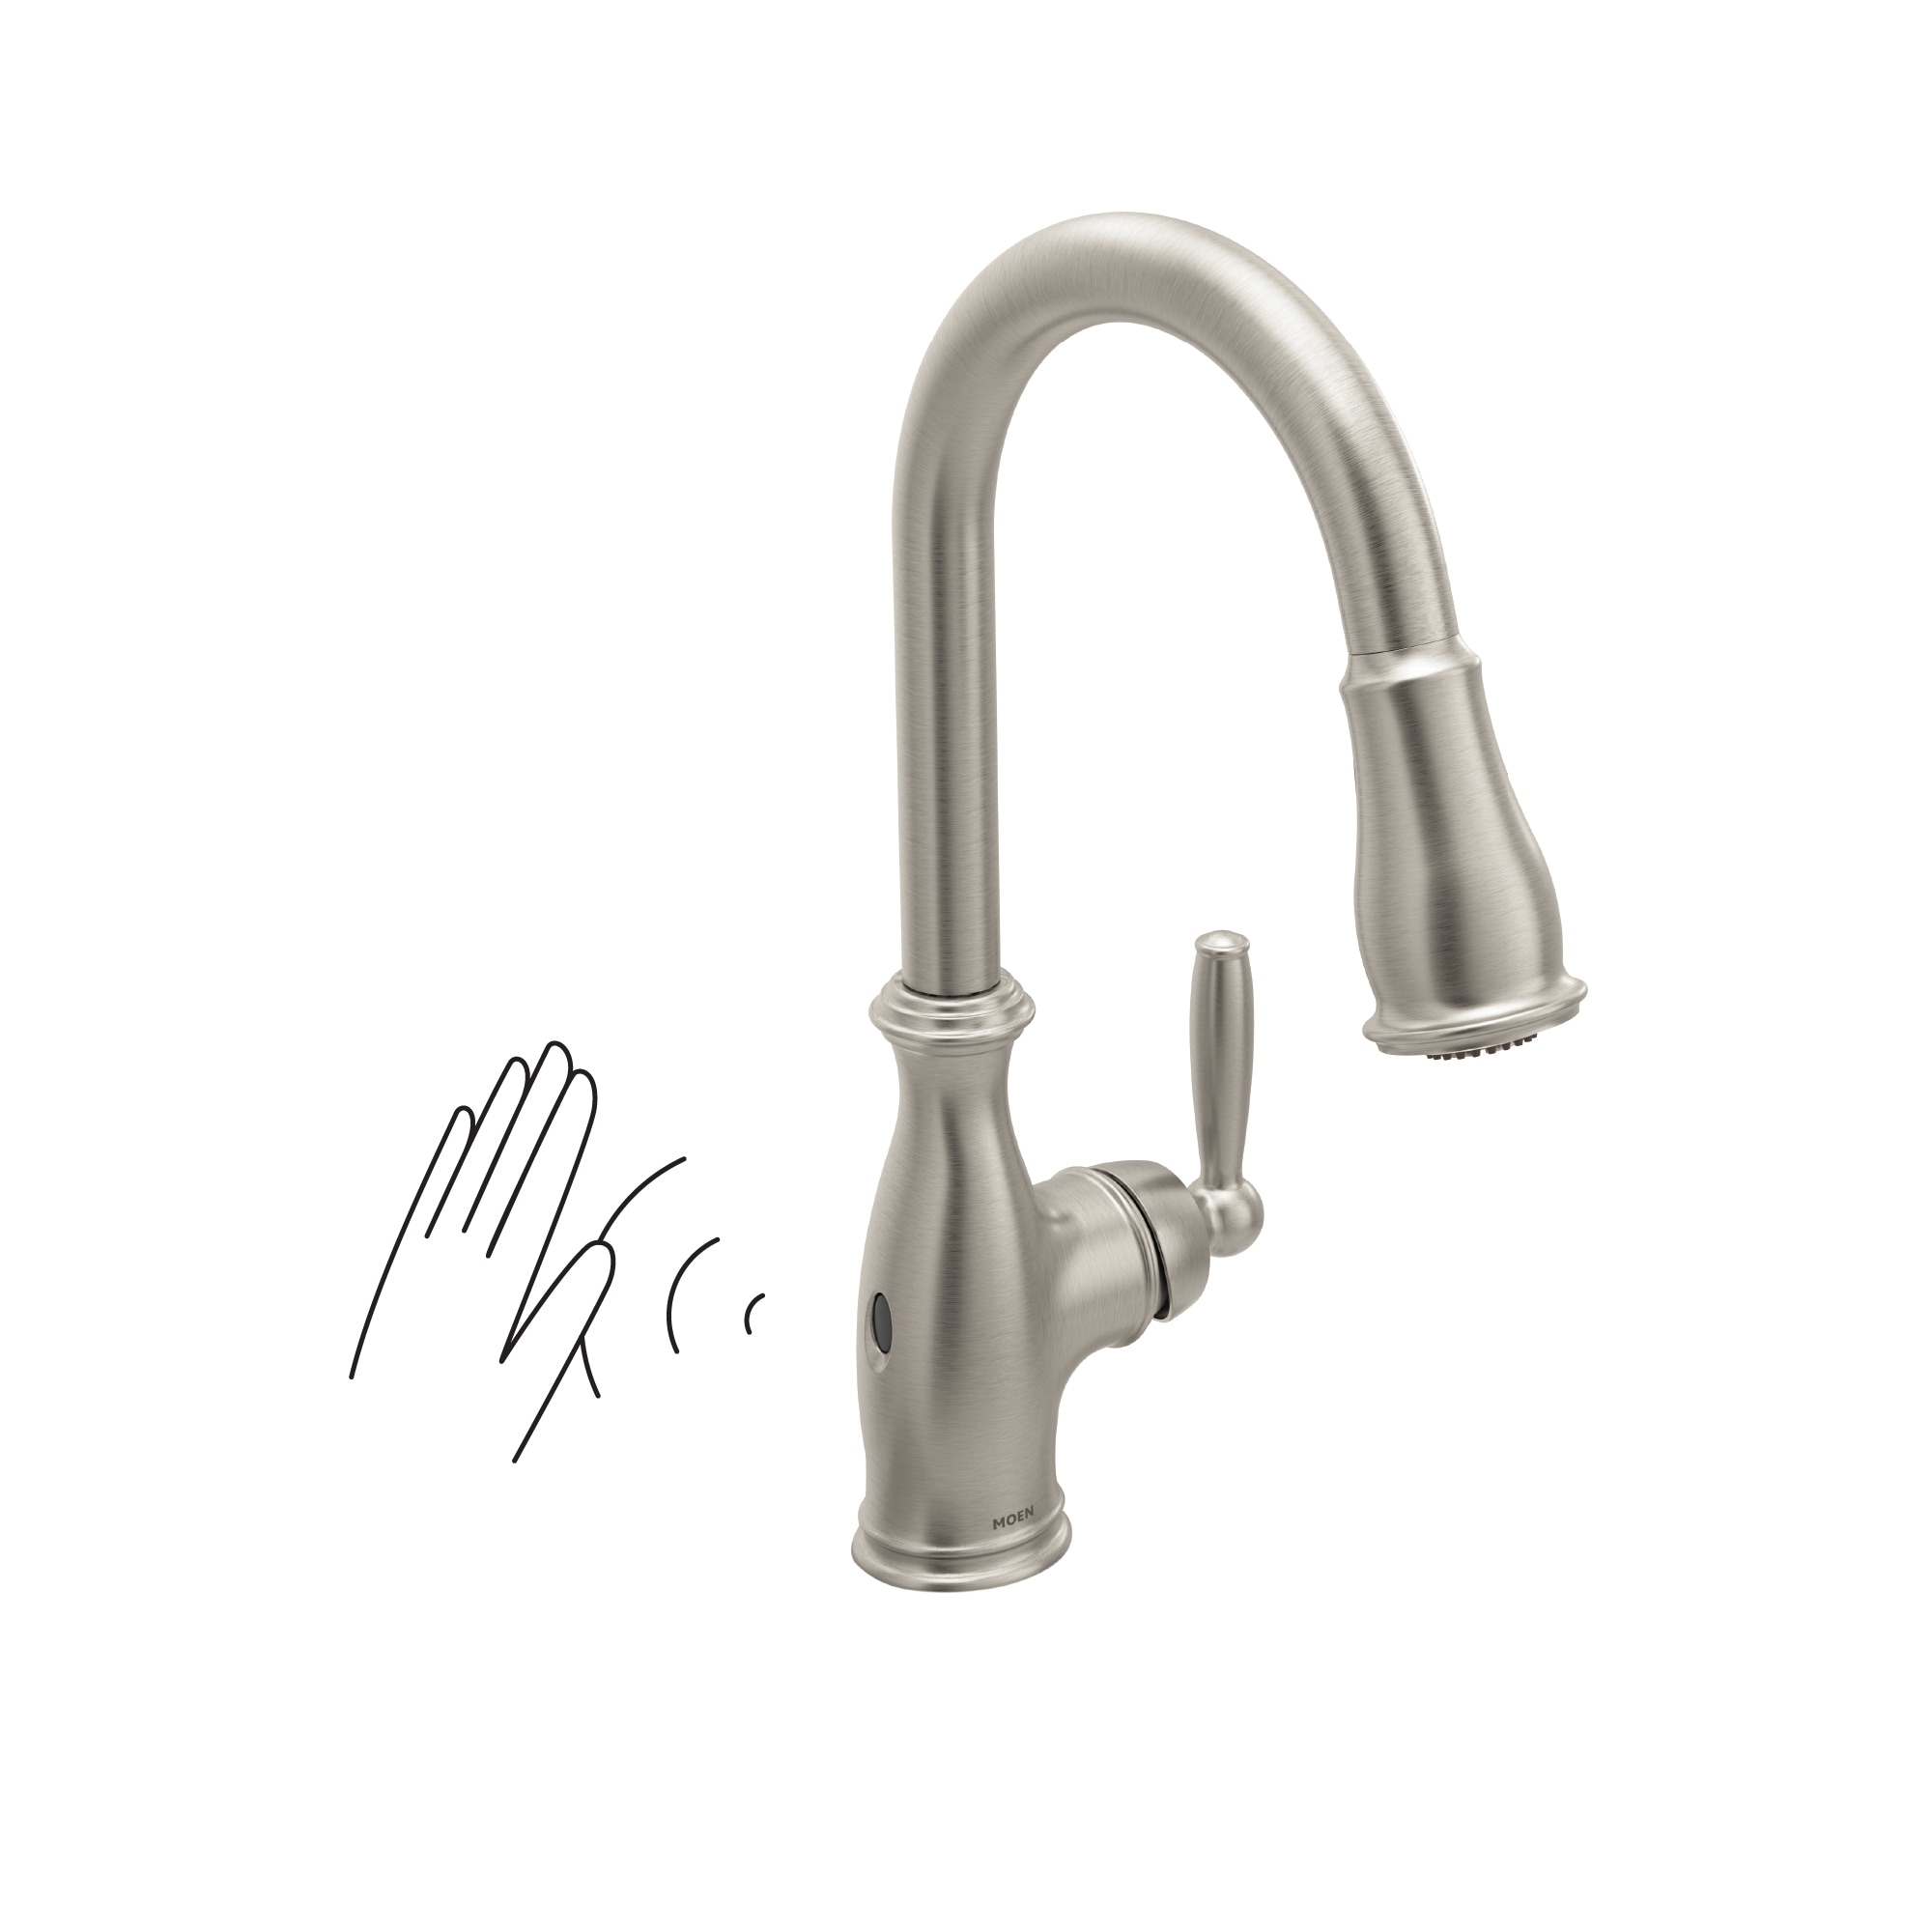 Touch Kitchen Faucet,KEER Smart Kitchen Sink Faucet with Pull Down Sprayer,  Touch on Activated Kitchen Bar Sink Faucet Brushed Nickel, Stainless Steel